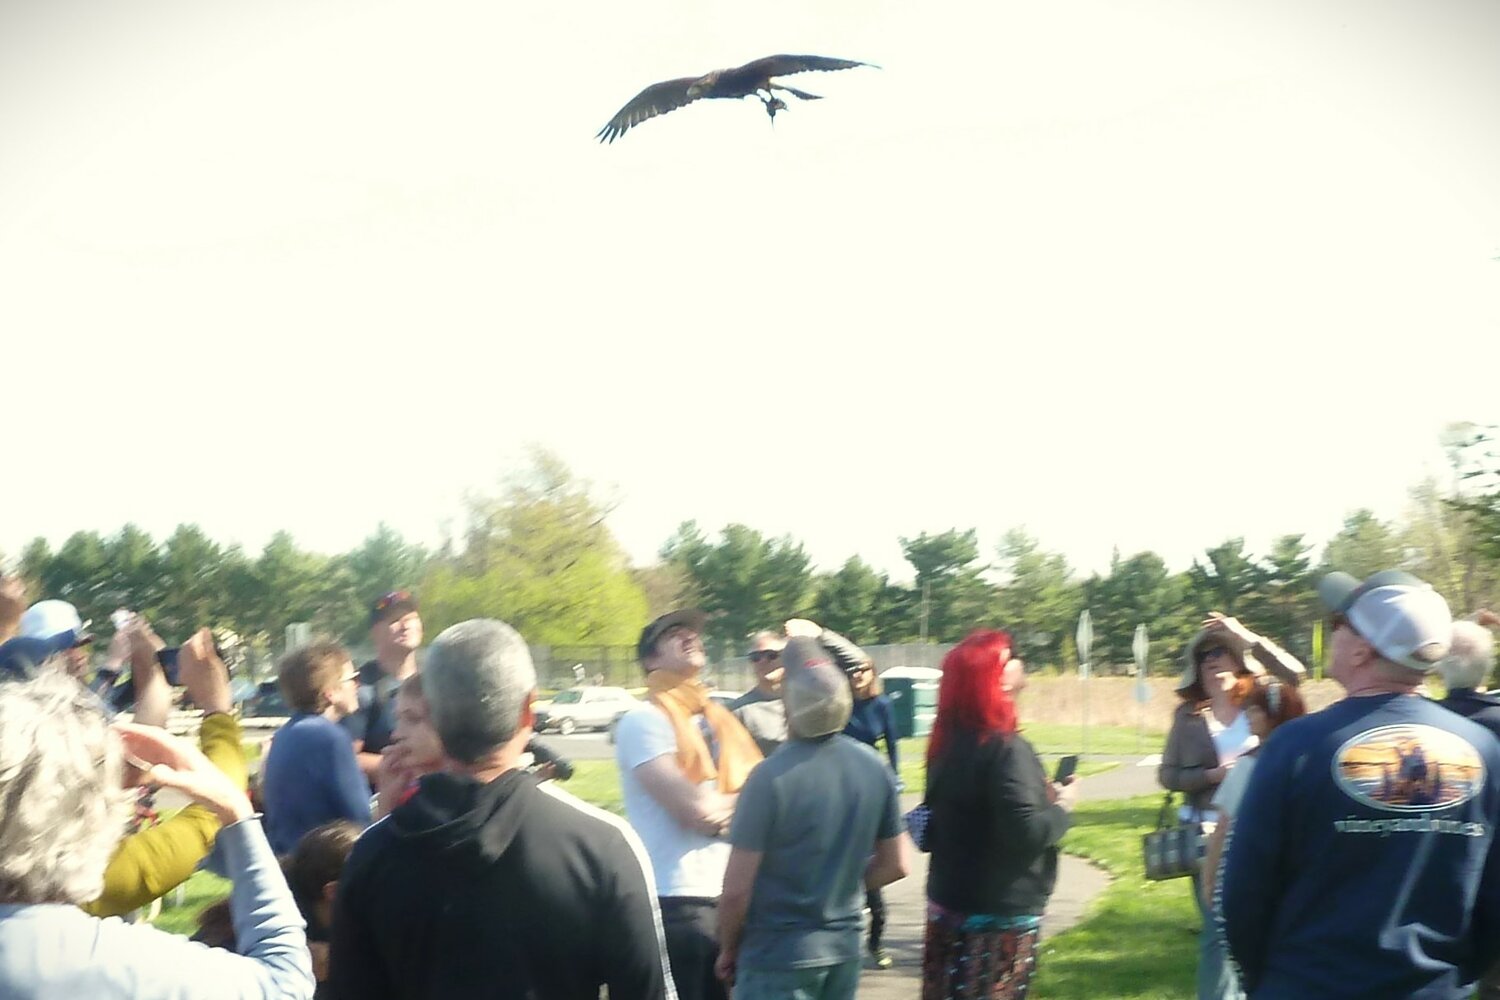 The crowd watches a hawk in flight.